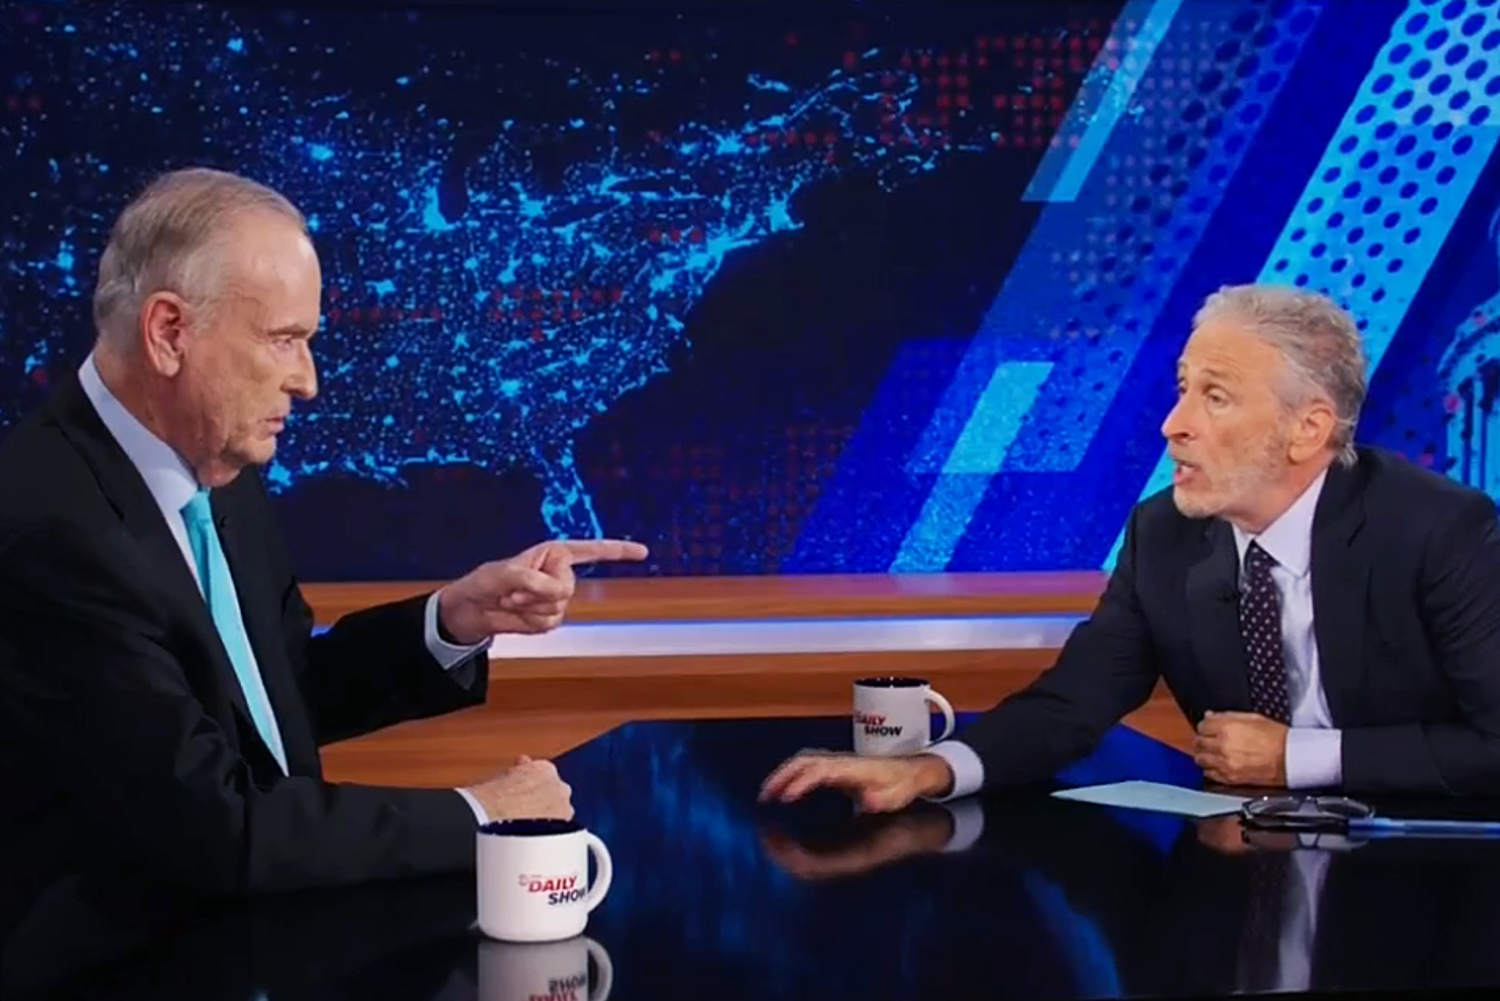 Bill O'Reilly returns to spar with Jon Stewart on 'The Daily Show' after a decade